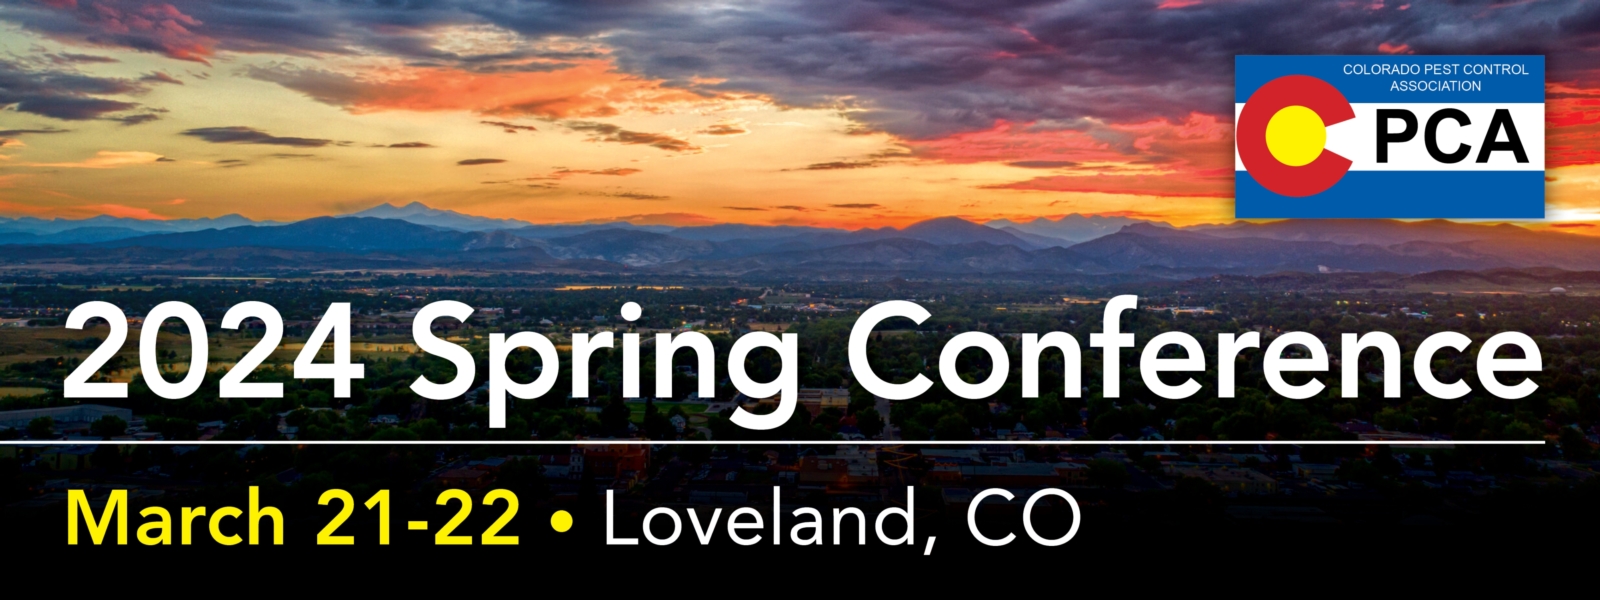 CPCA 2024 Spring Conference